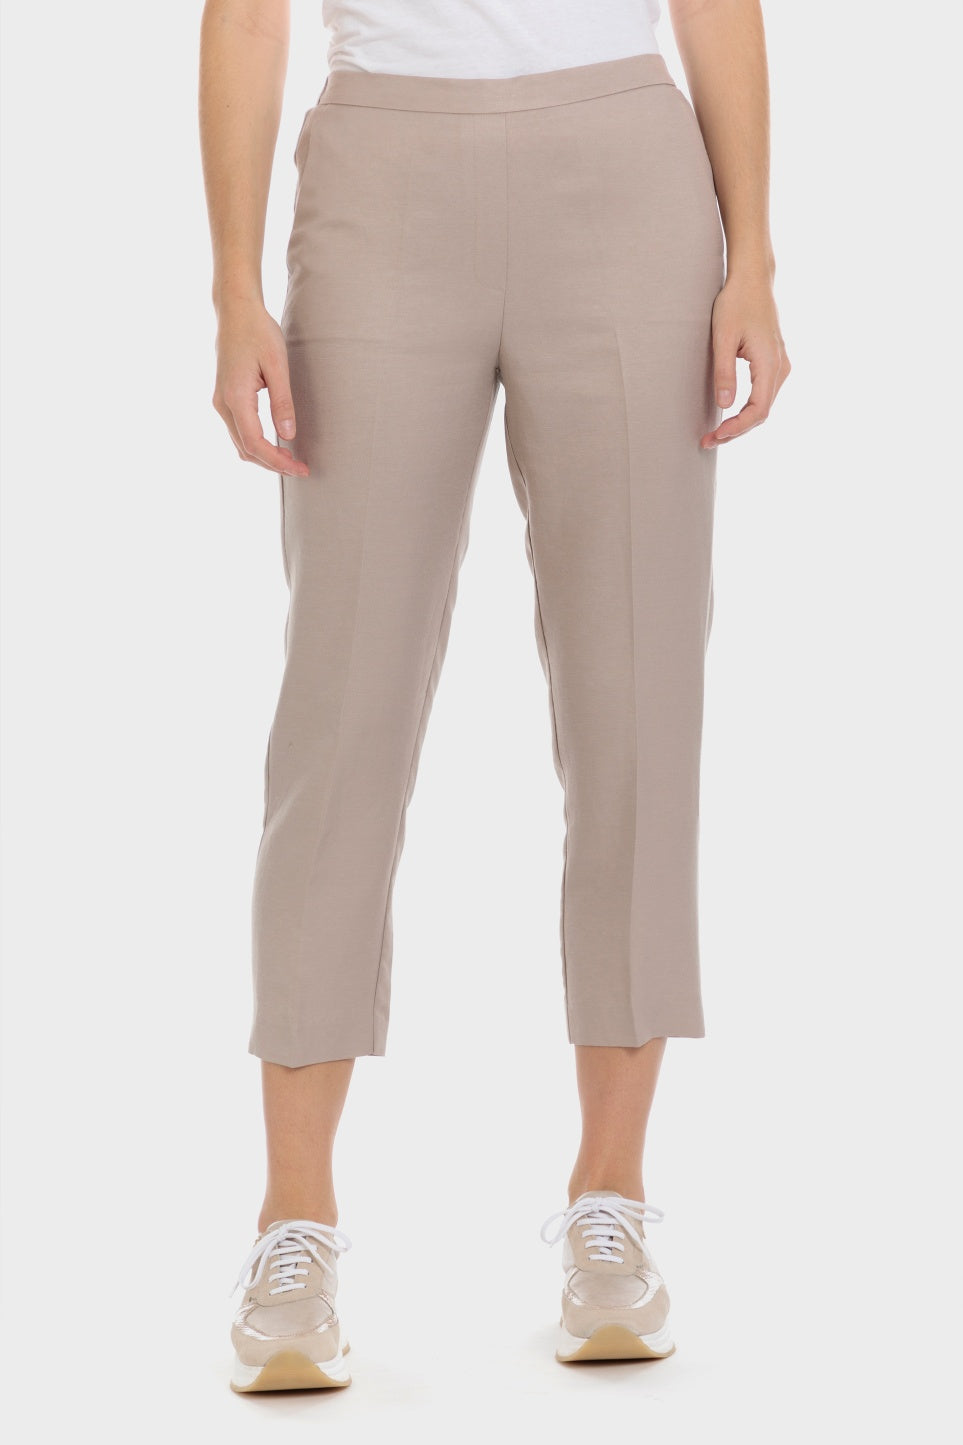 Punt Roma Beige Trousers 2 Shaws Department Stores